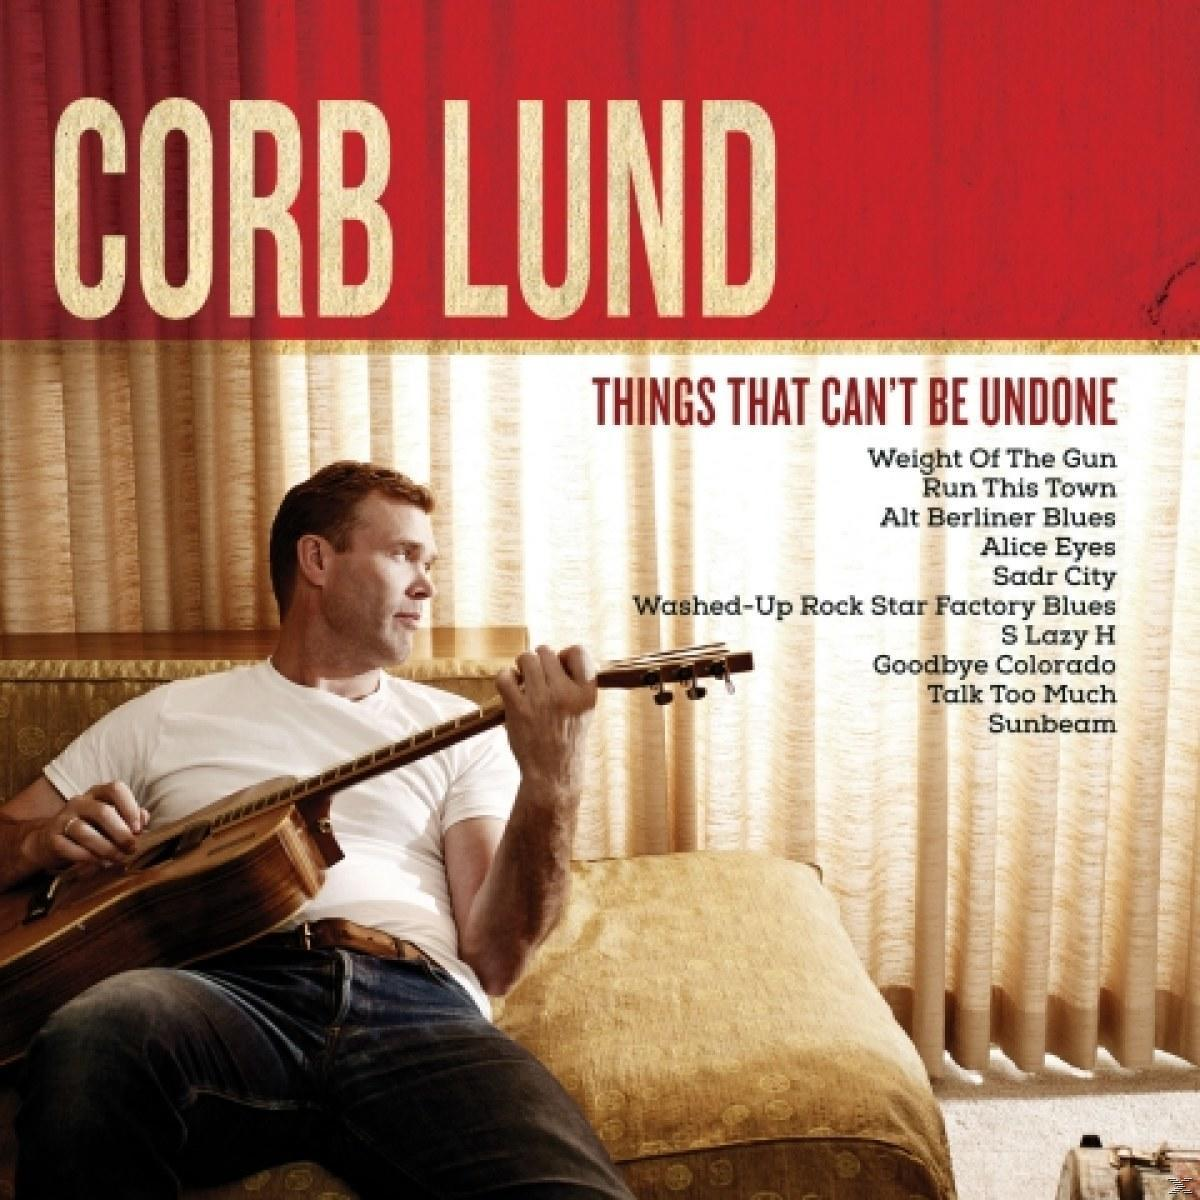 Lund - - Things Corb Undone (Vinyl) That Can\'t Be